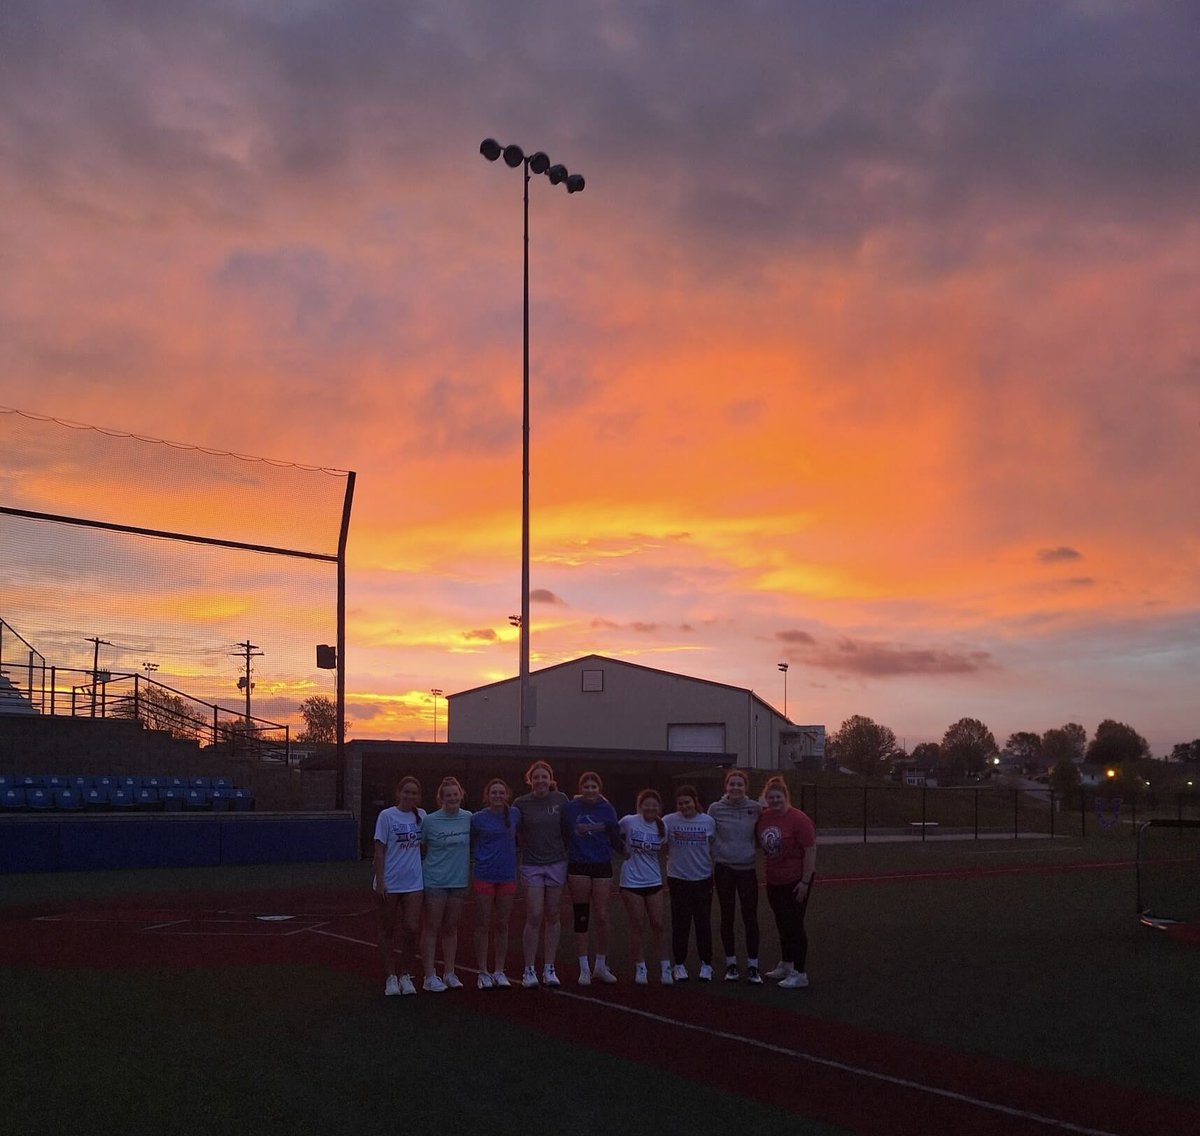 Putting work in this morning with my high school teammates!! Sunrise was so pretty!! @PintosAthletics @AcesFPMidMO #lpnation